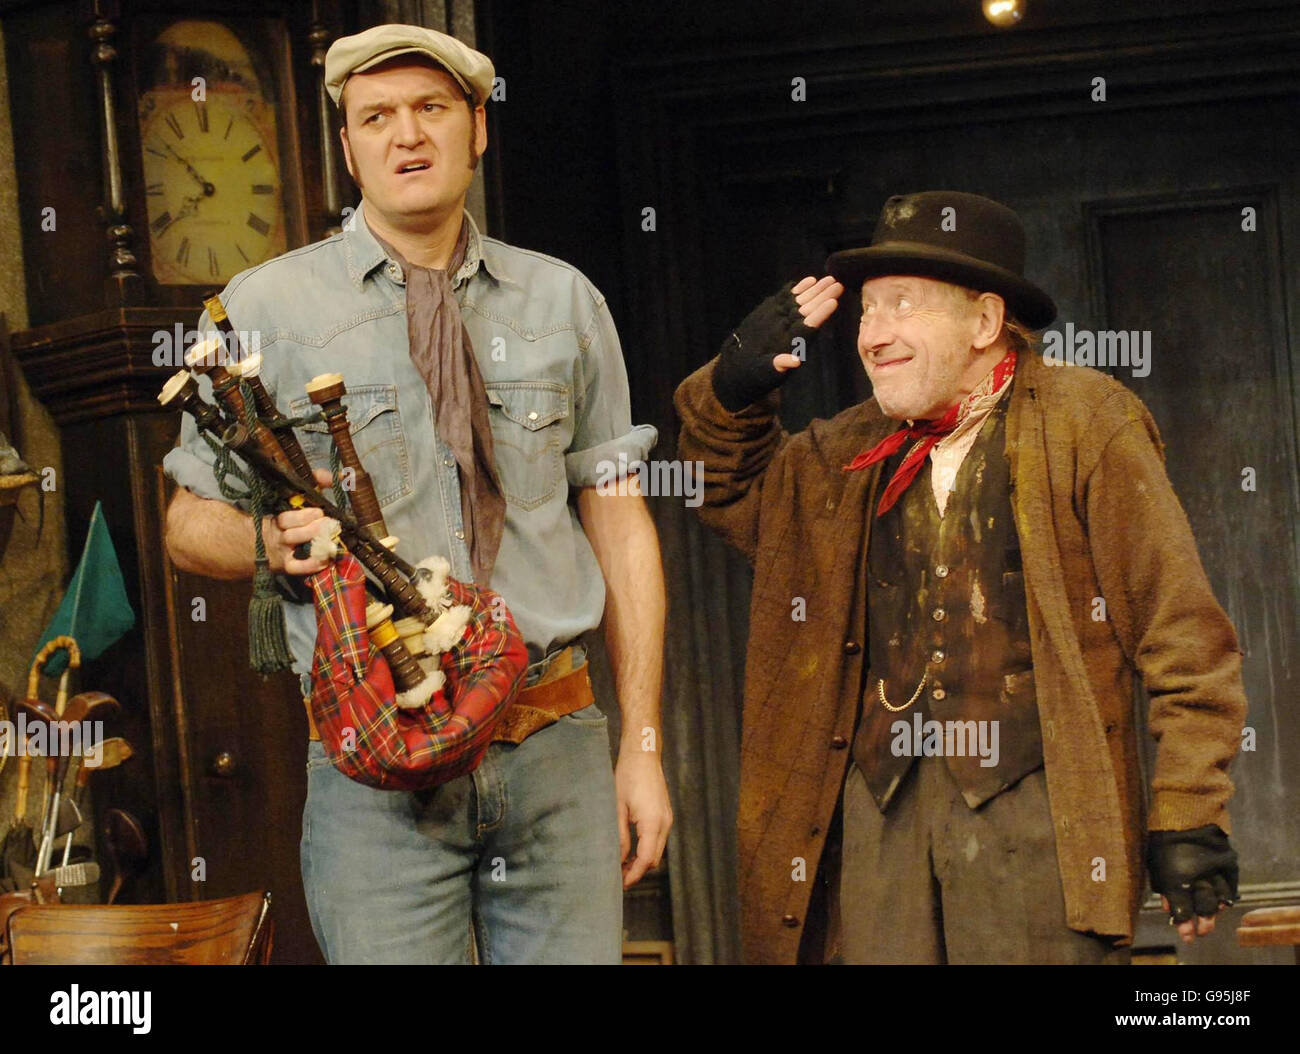 Jake Nightingale (left) playing Harold and Harry Dickman playing Albert in 'Steptoe and Son, Murder at Oil Drum Lane', the recreation of the TV comedy which starts its run at the Comedy Theatre in London's West End from 16 February. PRESS ASSOCIATION Photo. Photo credit should read: Stefan Rousseau/PA Stock Photo